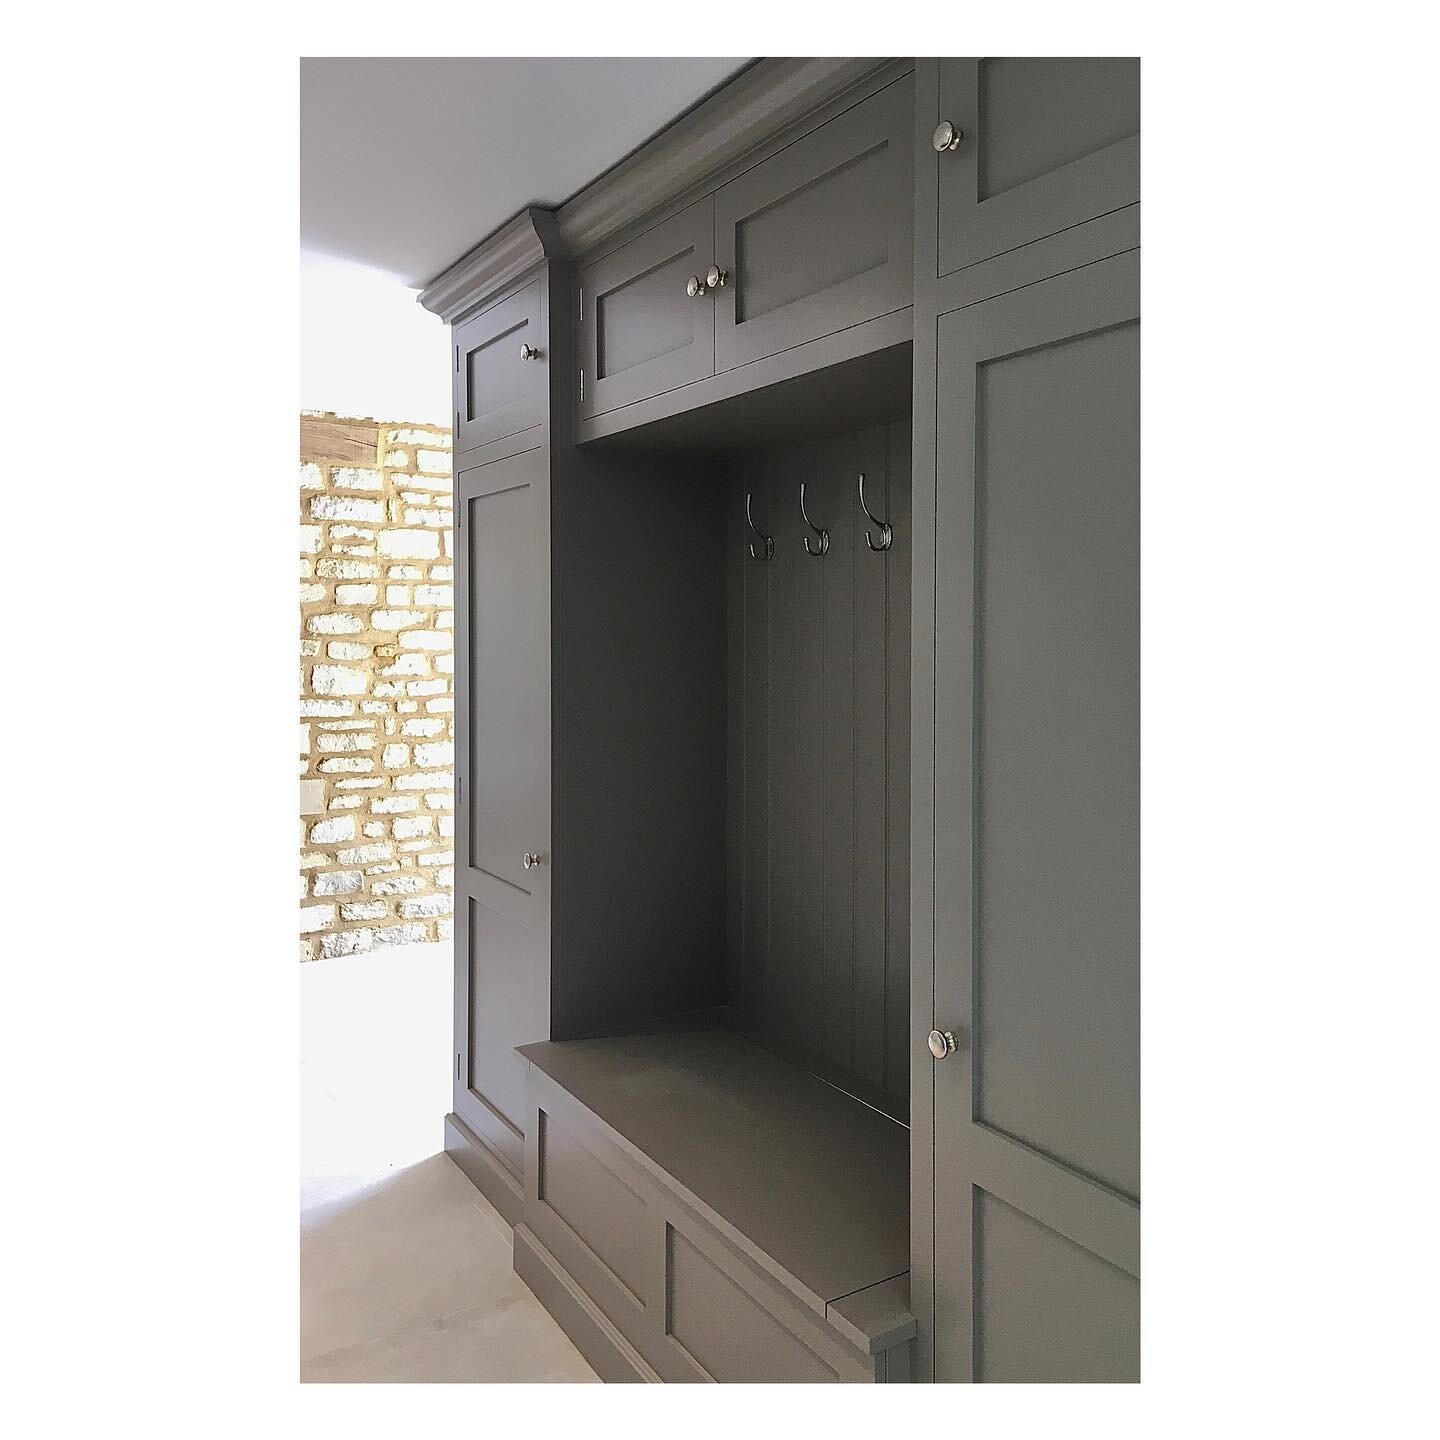 Some lovely new bespoke furniture for a lovely entrance hall
.
.
.
.
#bespokefurniture #cotswolds #benchseating #coathooks #cotswoldstone #interiordesigns